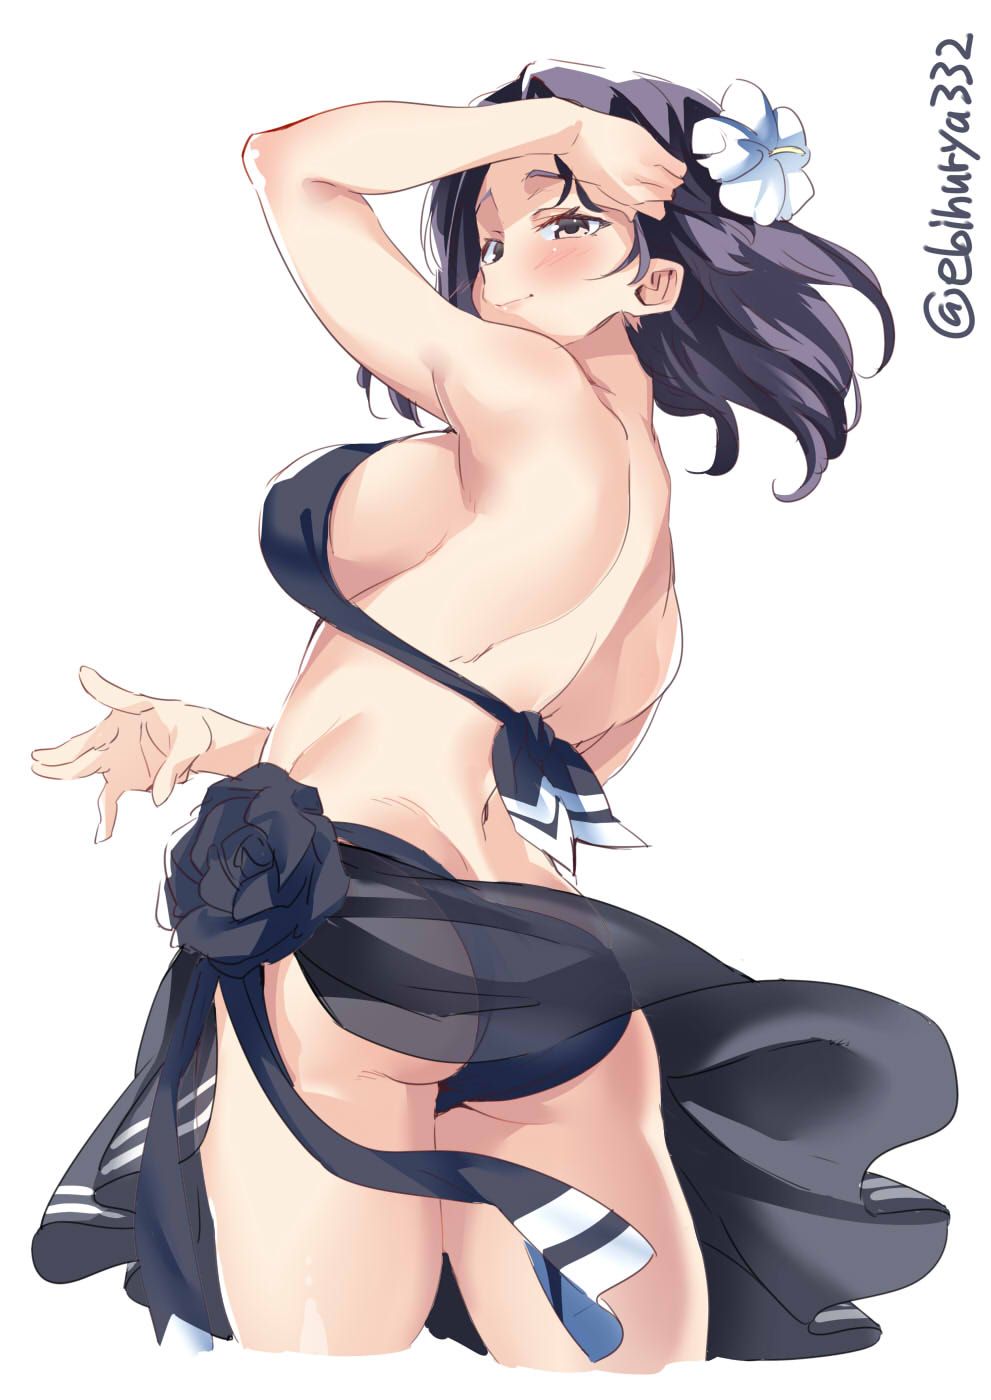 [Fleet Collection] Erotic image of Tatsuta who wants to appreciate according to the voice actor's erotic voice 19